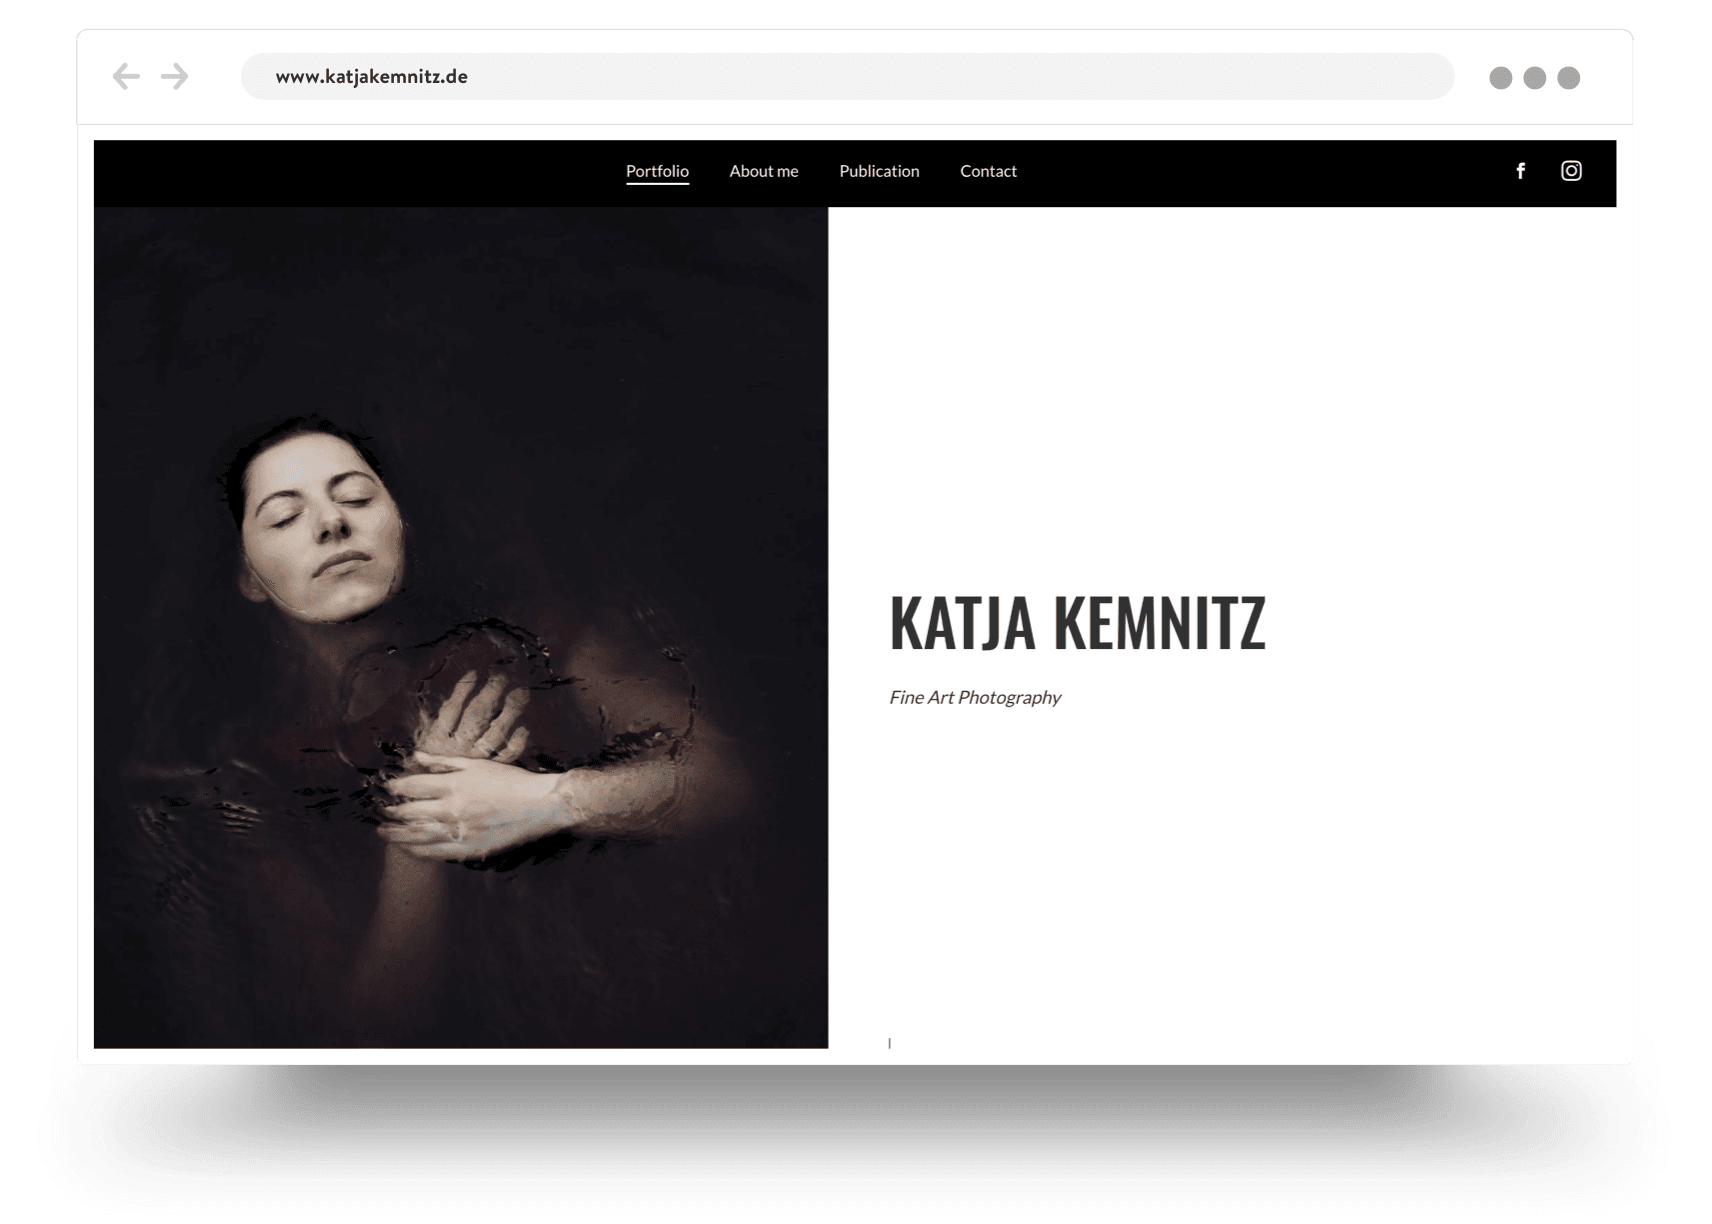 Example of a fine art photography portfolio website built with Jimdo